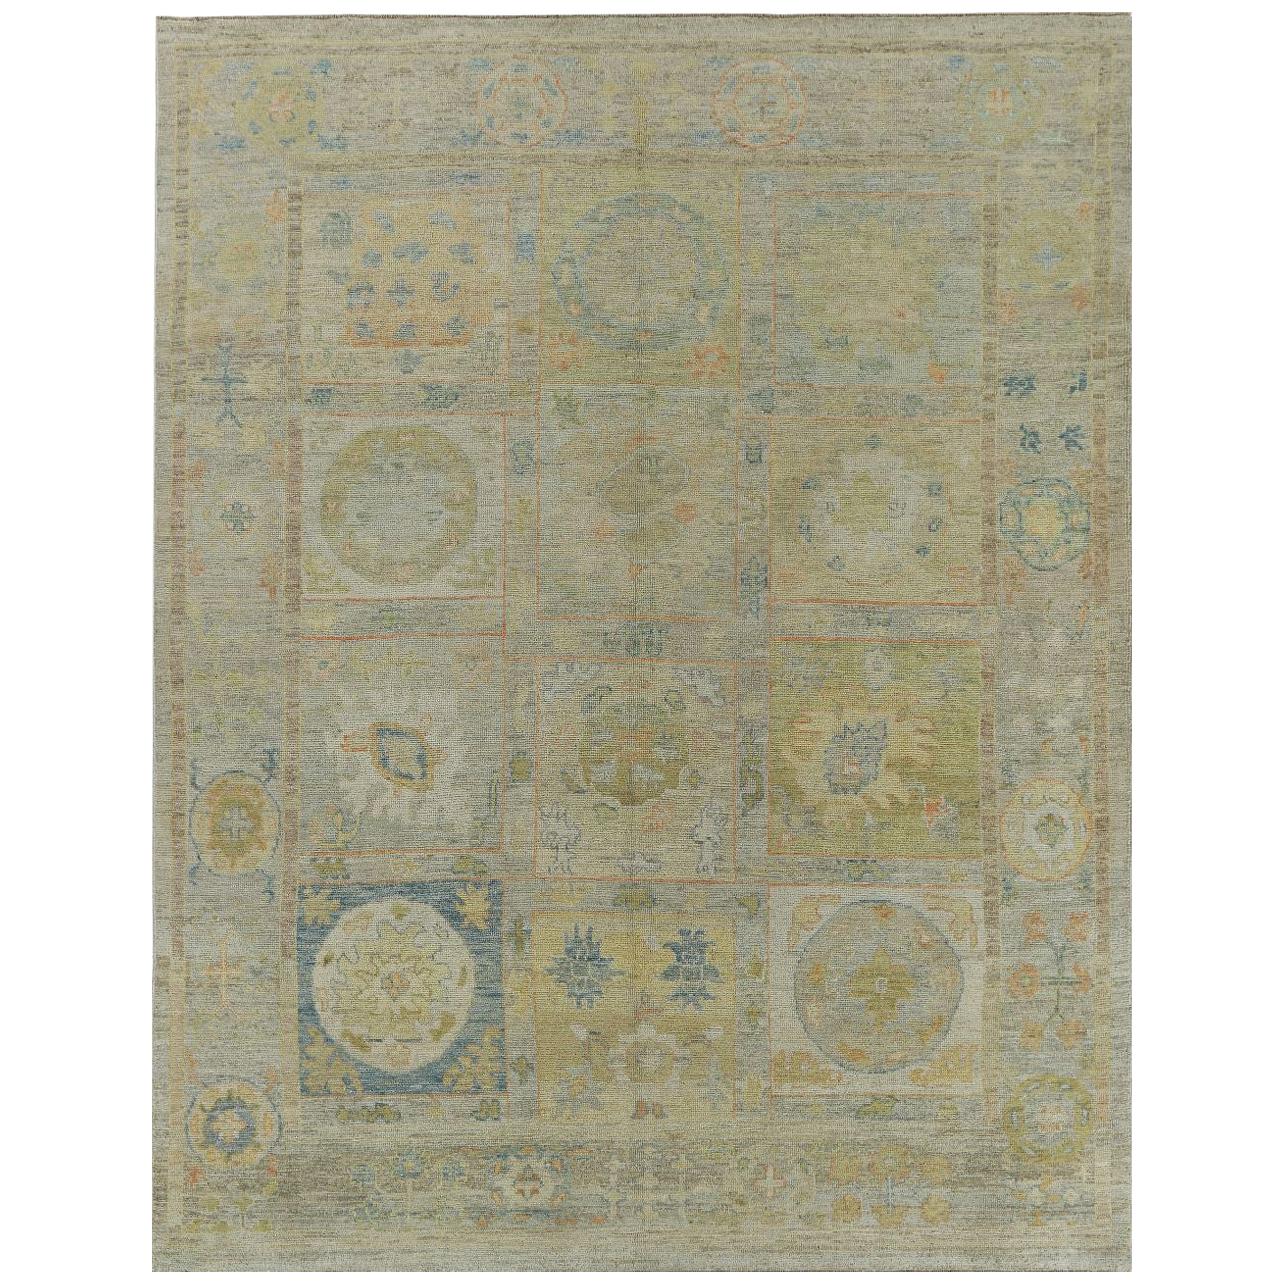 Nazmiyal Collection Modern Turkish Oushak. 10 ft. 7 in x 13 ft. 6 in For Sale